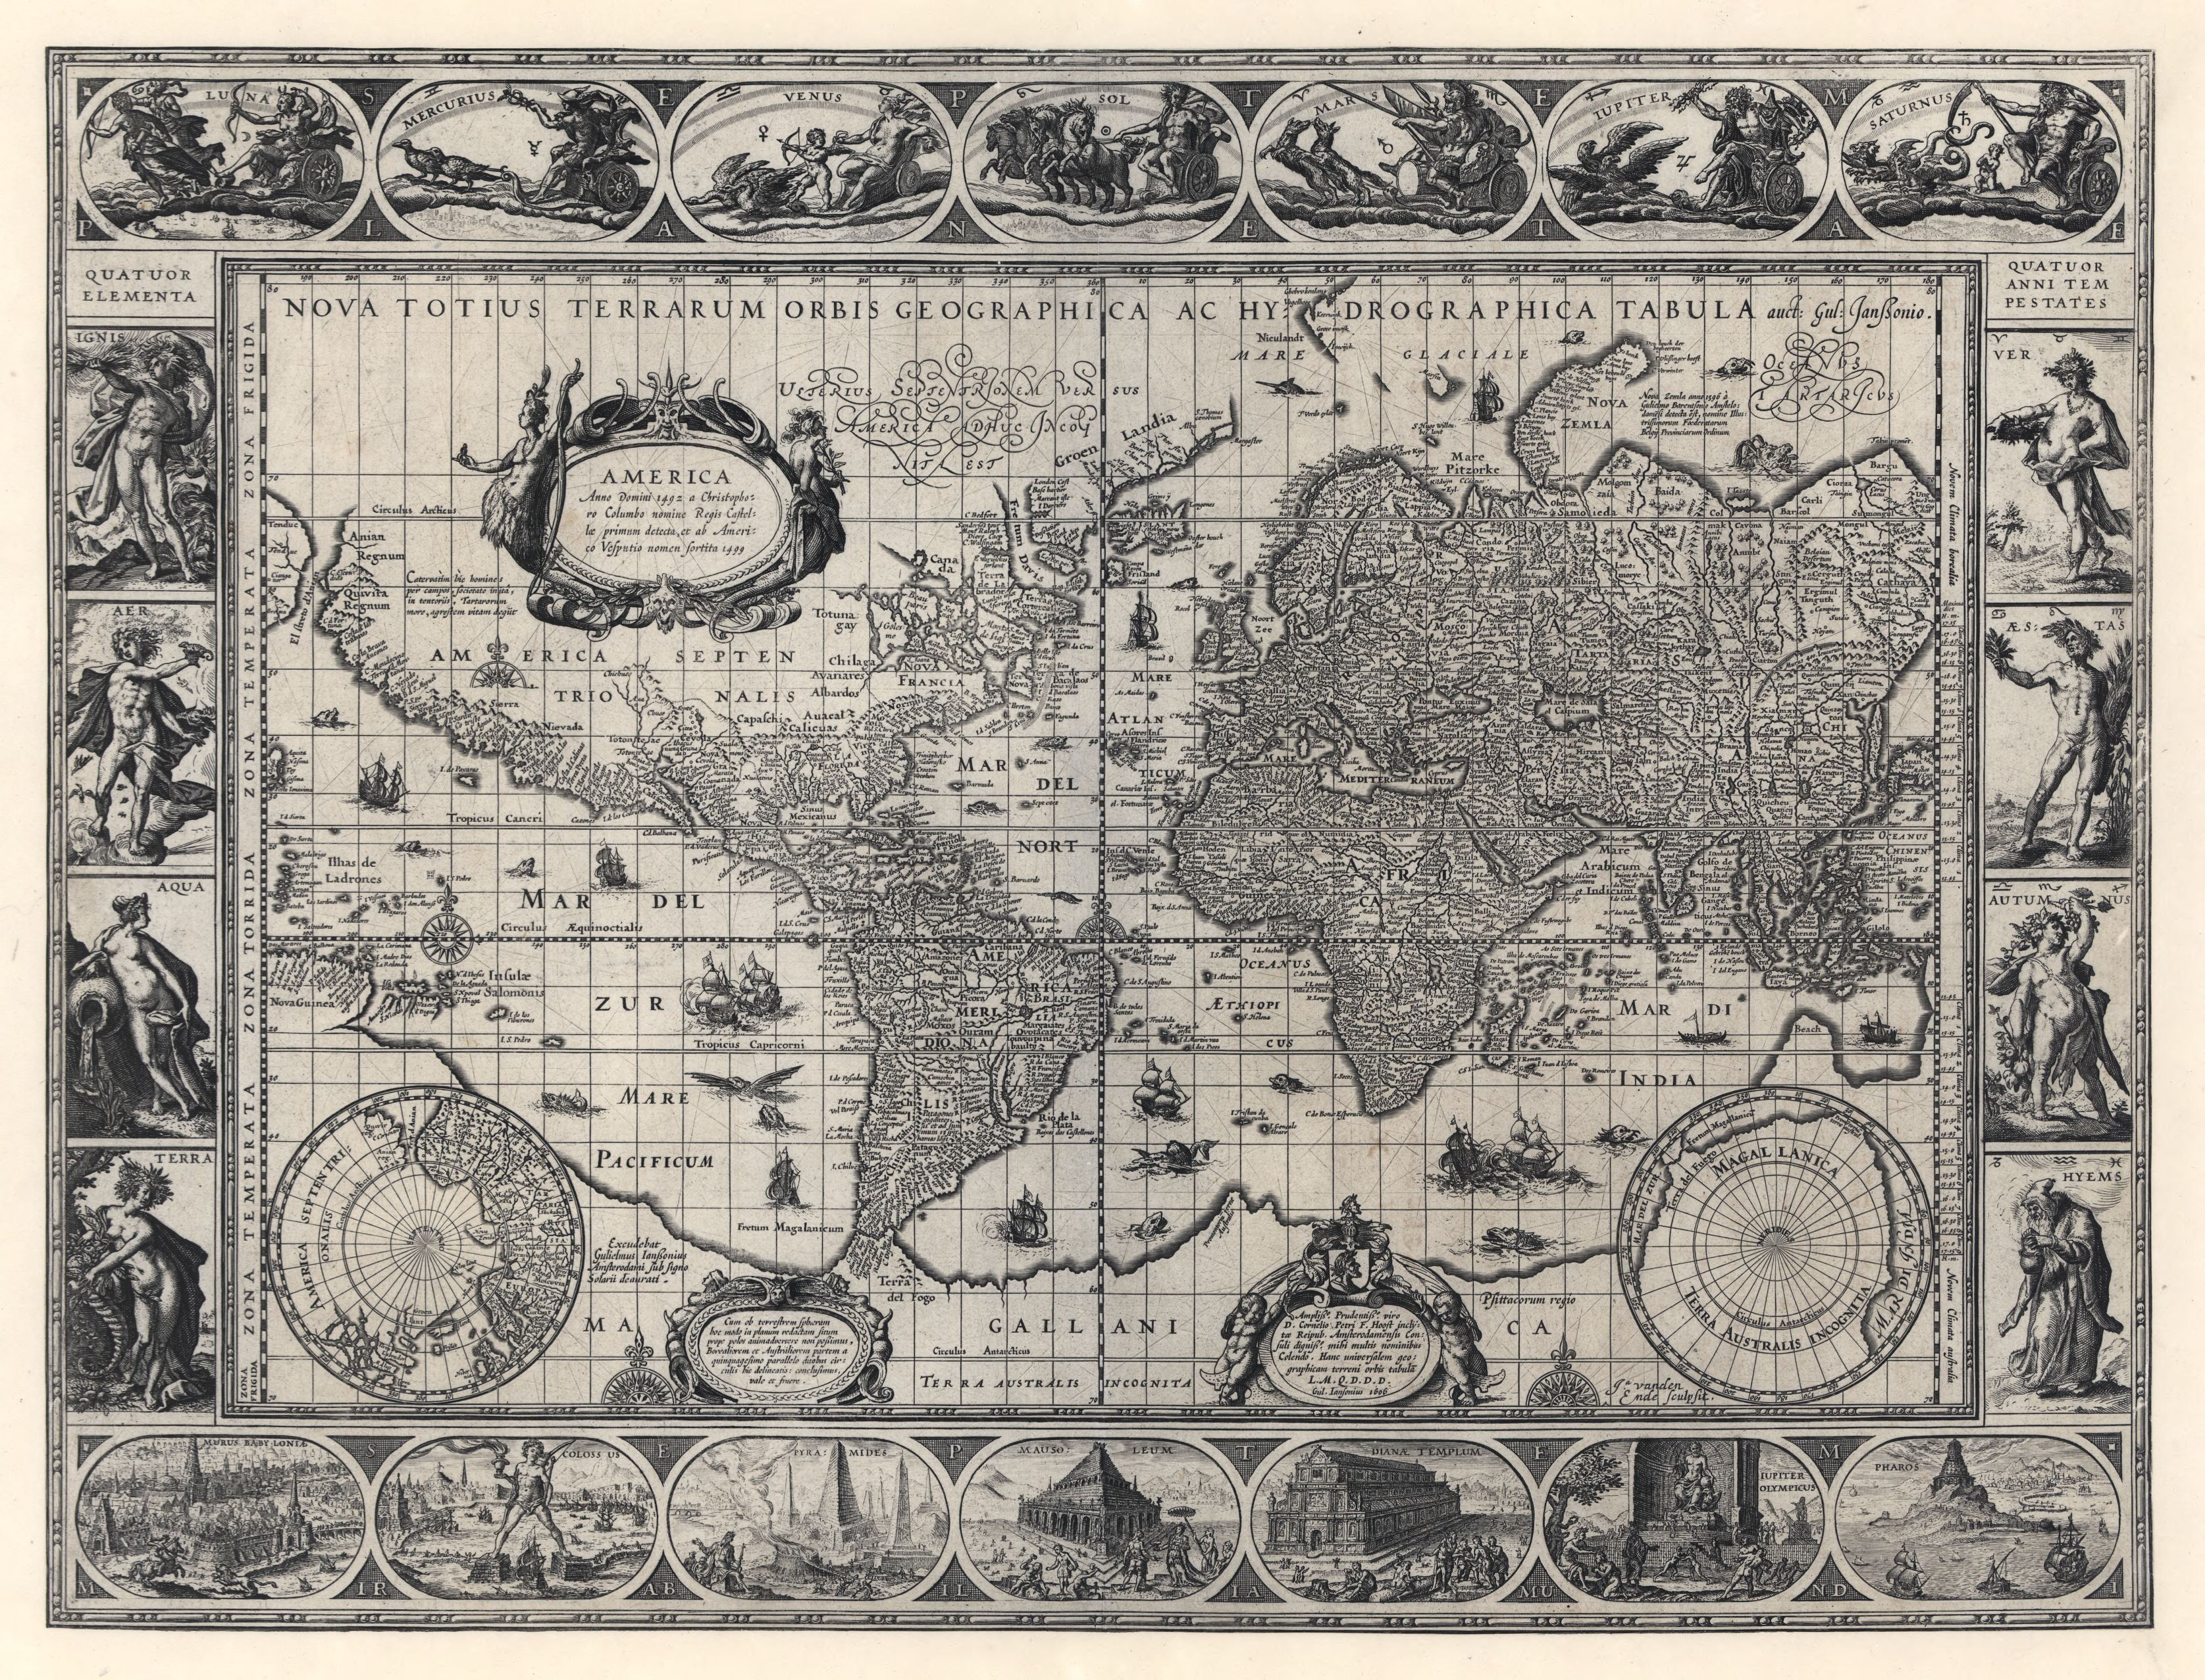 Figure 7: Nova Totius Terrarum Orbis Geographica ac Hydrographica Tabula [“New
Geographical and Hydrographical Map of the Whole Sphere of the World”] by
Willem Janszoon Blaeu [G. Ianssonius, Willem’s original patronymic] and engraved
by Josua van den Ende (Amsterdam, 1606). For over fifty years, this world map on
a Mercator projection (30 × 45 cm, 12 × 18 in)—described as “one of the supreme
examples of the map maker’s art”—enjoyed an active circulation (Shirley 2001, entry
255). Along its borders, allegorical figures of the seven planets (top) echo vignettes
depicting the Seven Wonders of the Ancient World (bottom), while the four elements
(left) echo the four seasons (right). The map itself features ships and sea monsters
skirting the coast of an enormous southern continent whose size nearly counter-balances
that of the known world. Courtesy of the Library of Congress (G3200 1606 .B6).